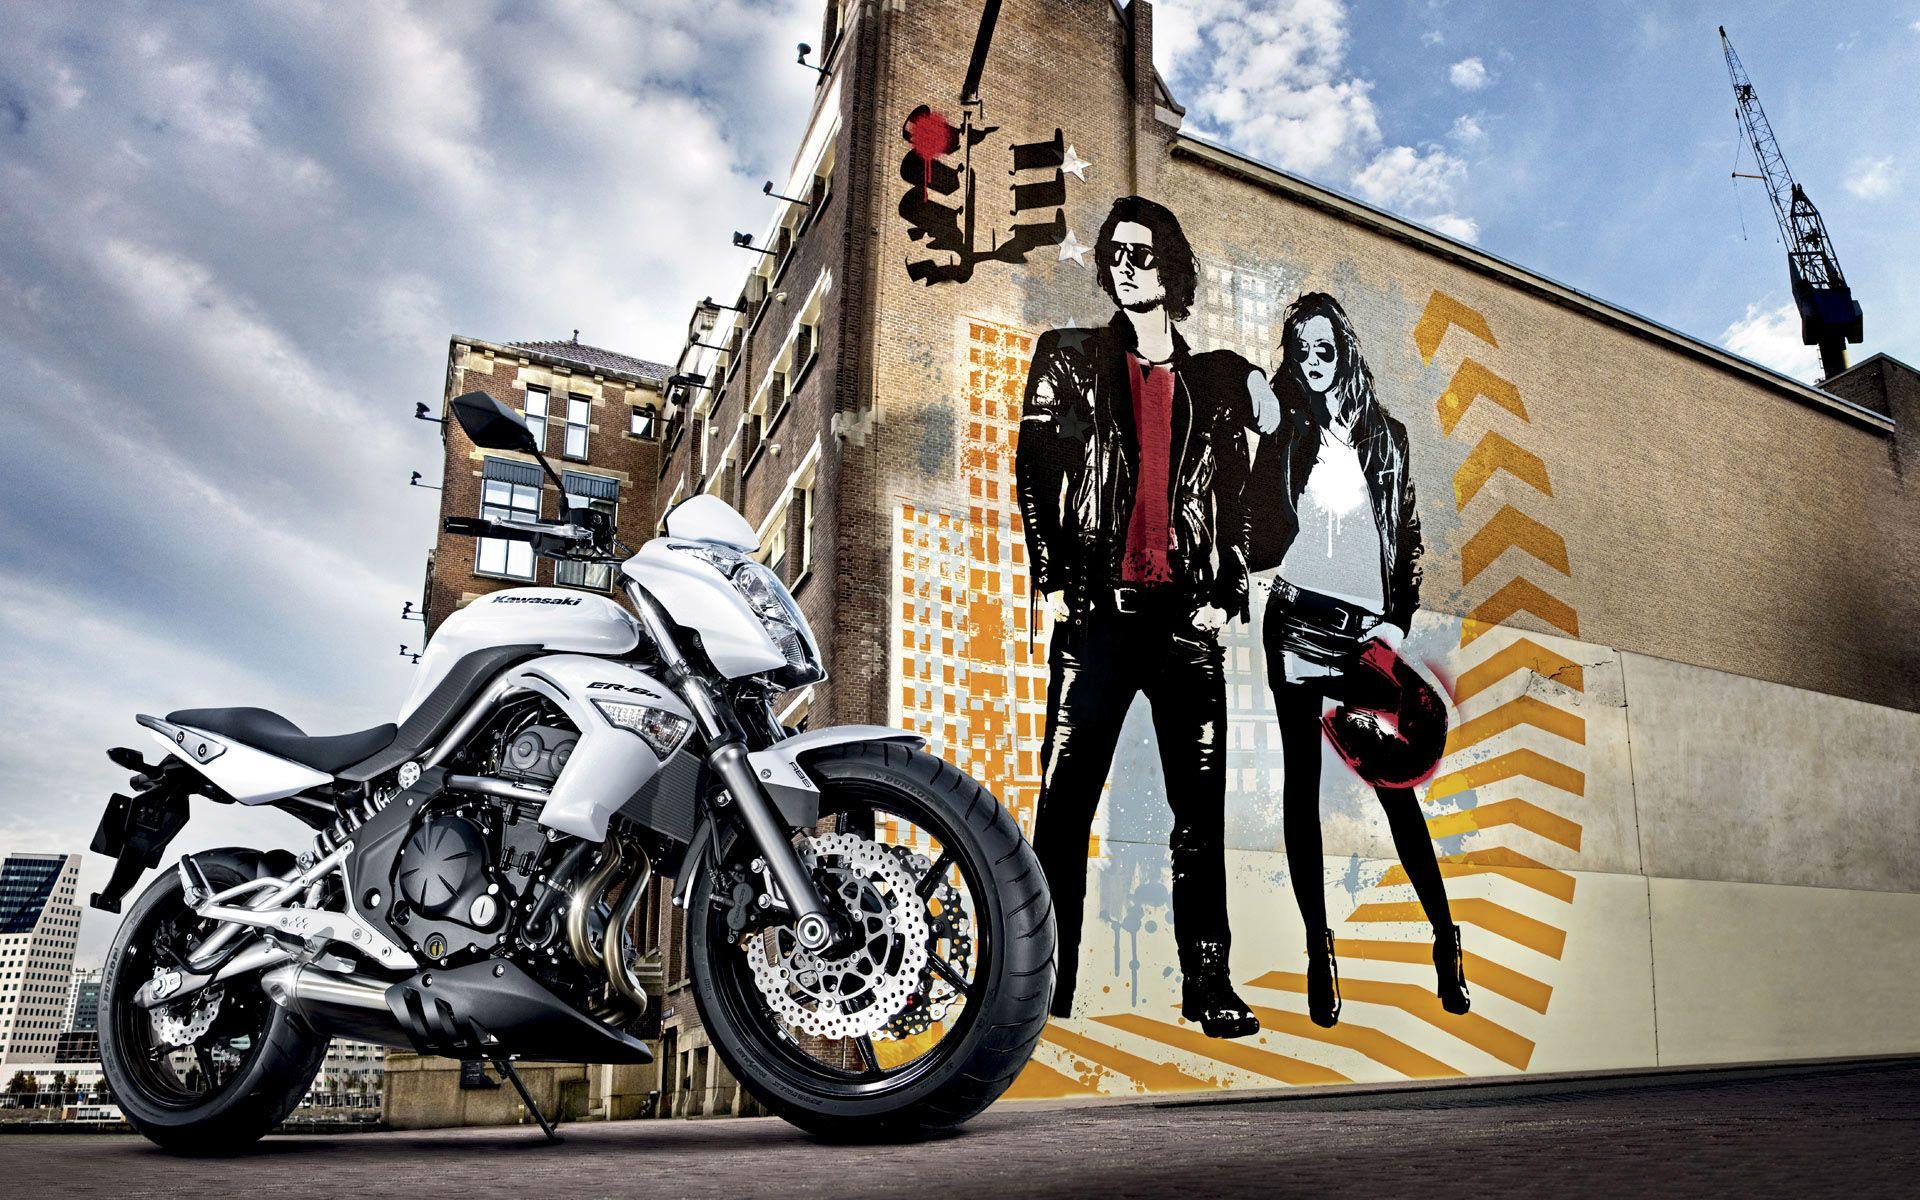 Bikers wallpaper and image, picture, photo